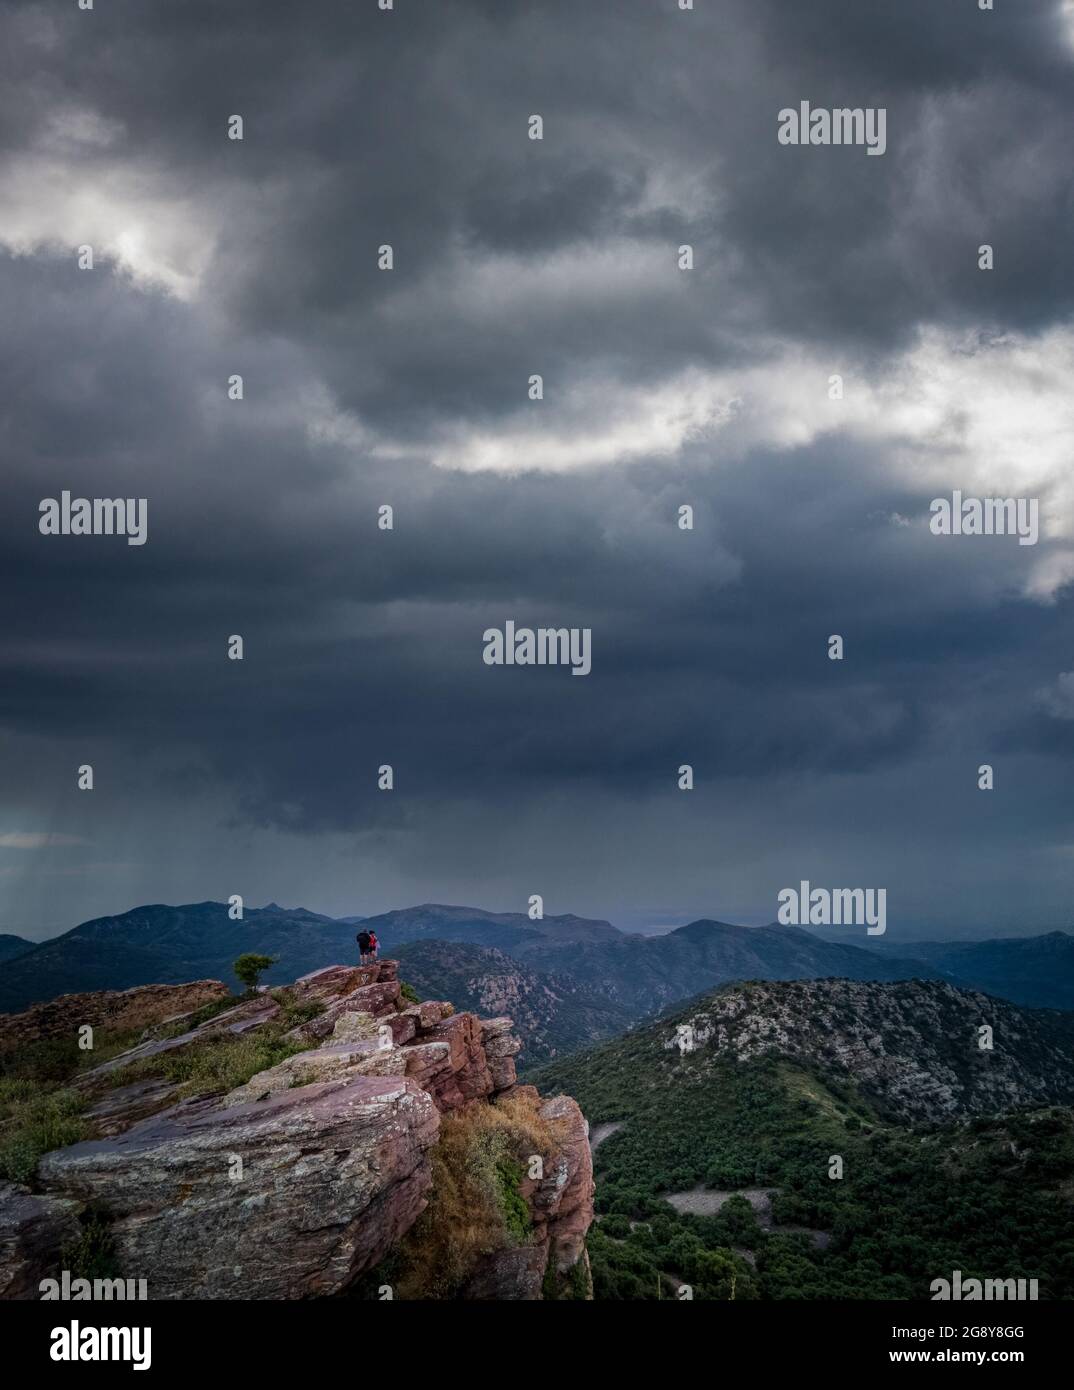 Dark storm and unrecognizable hikers on top of the rocks Stock Photo